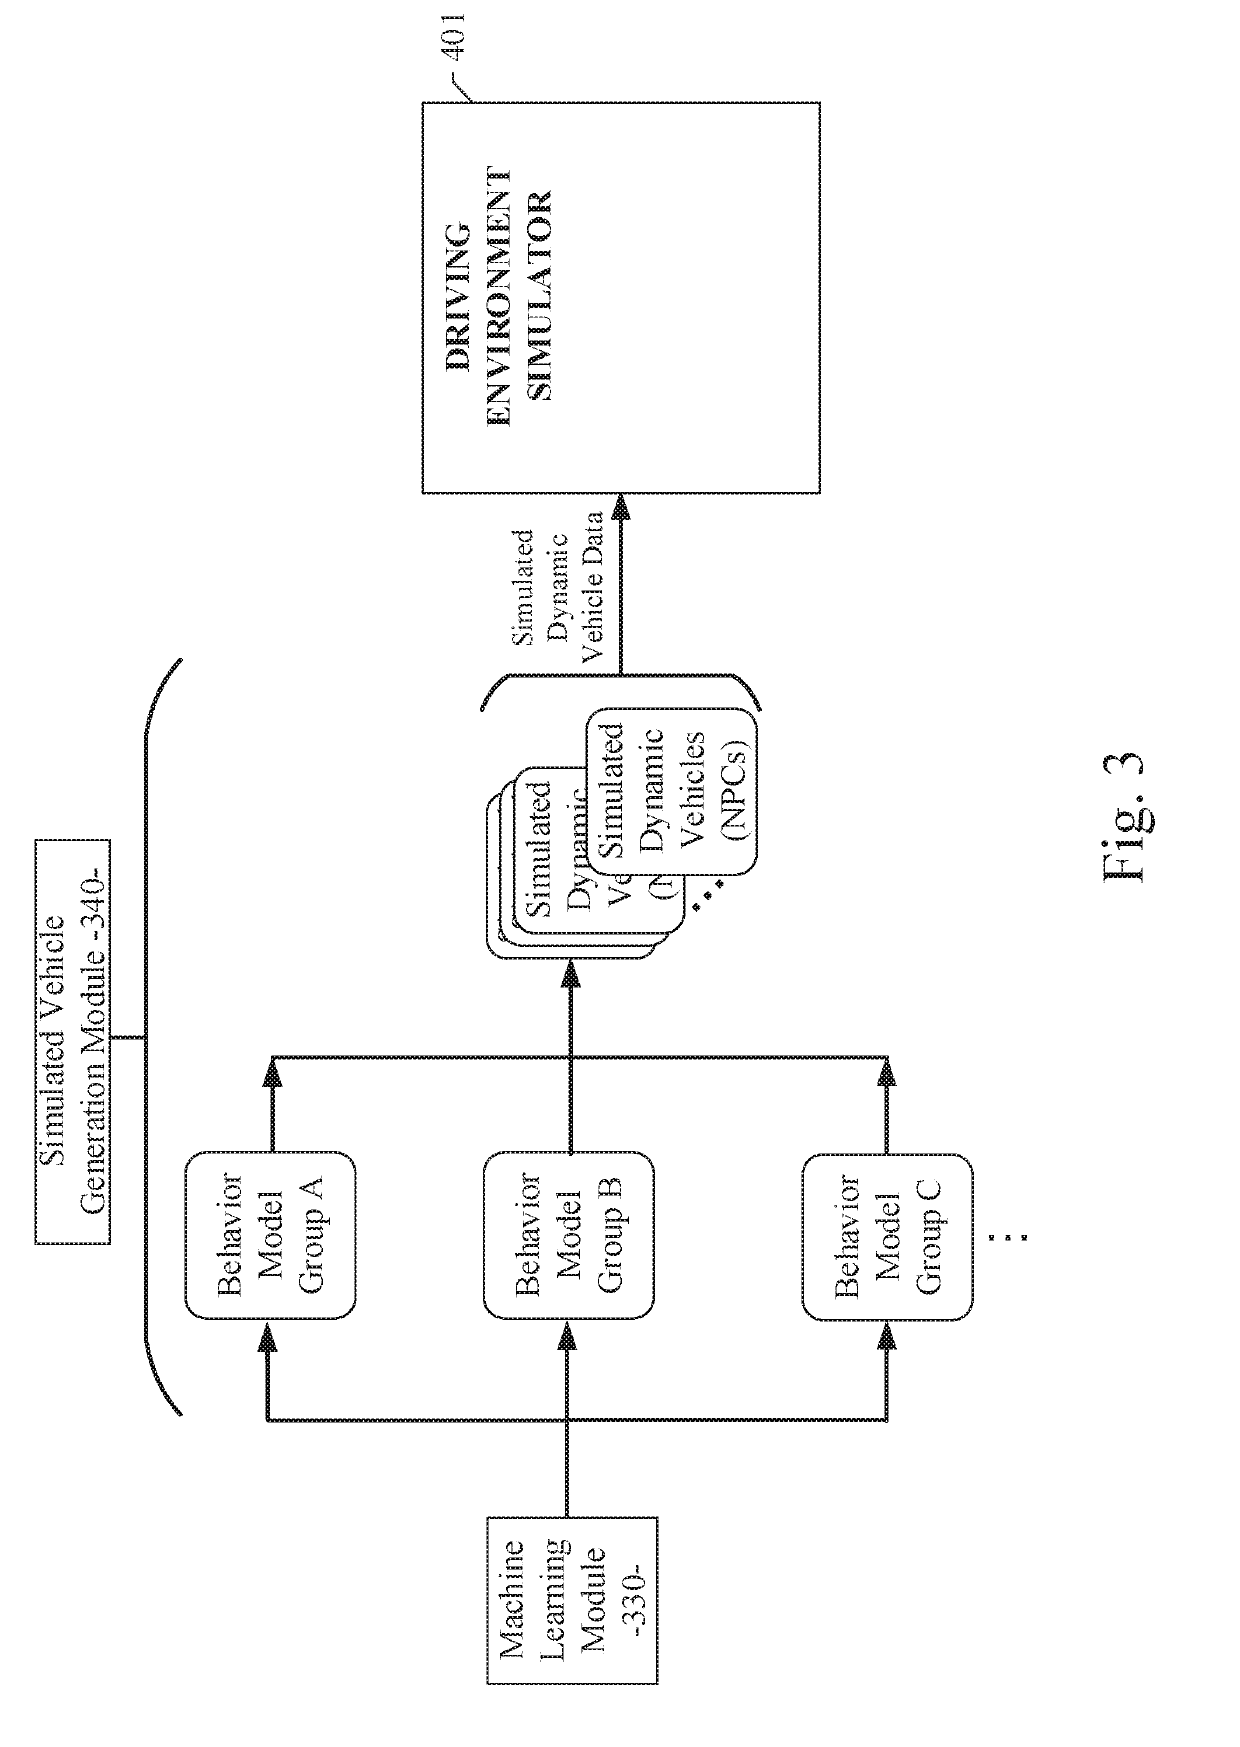 Human driving behavior modeling system using machine learning